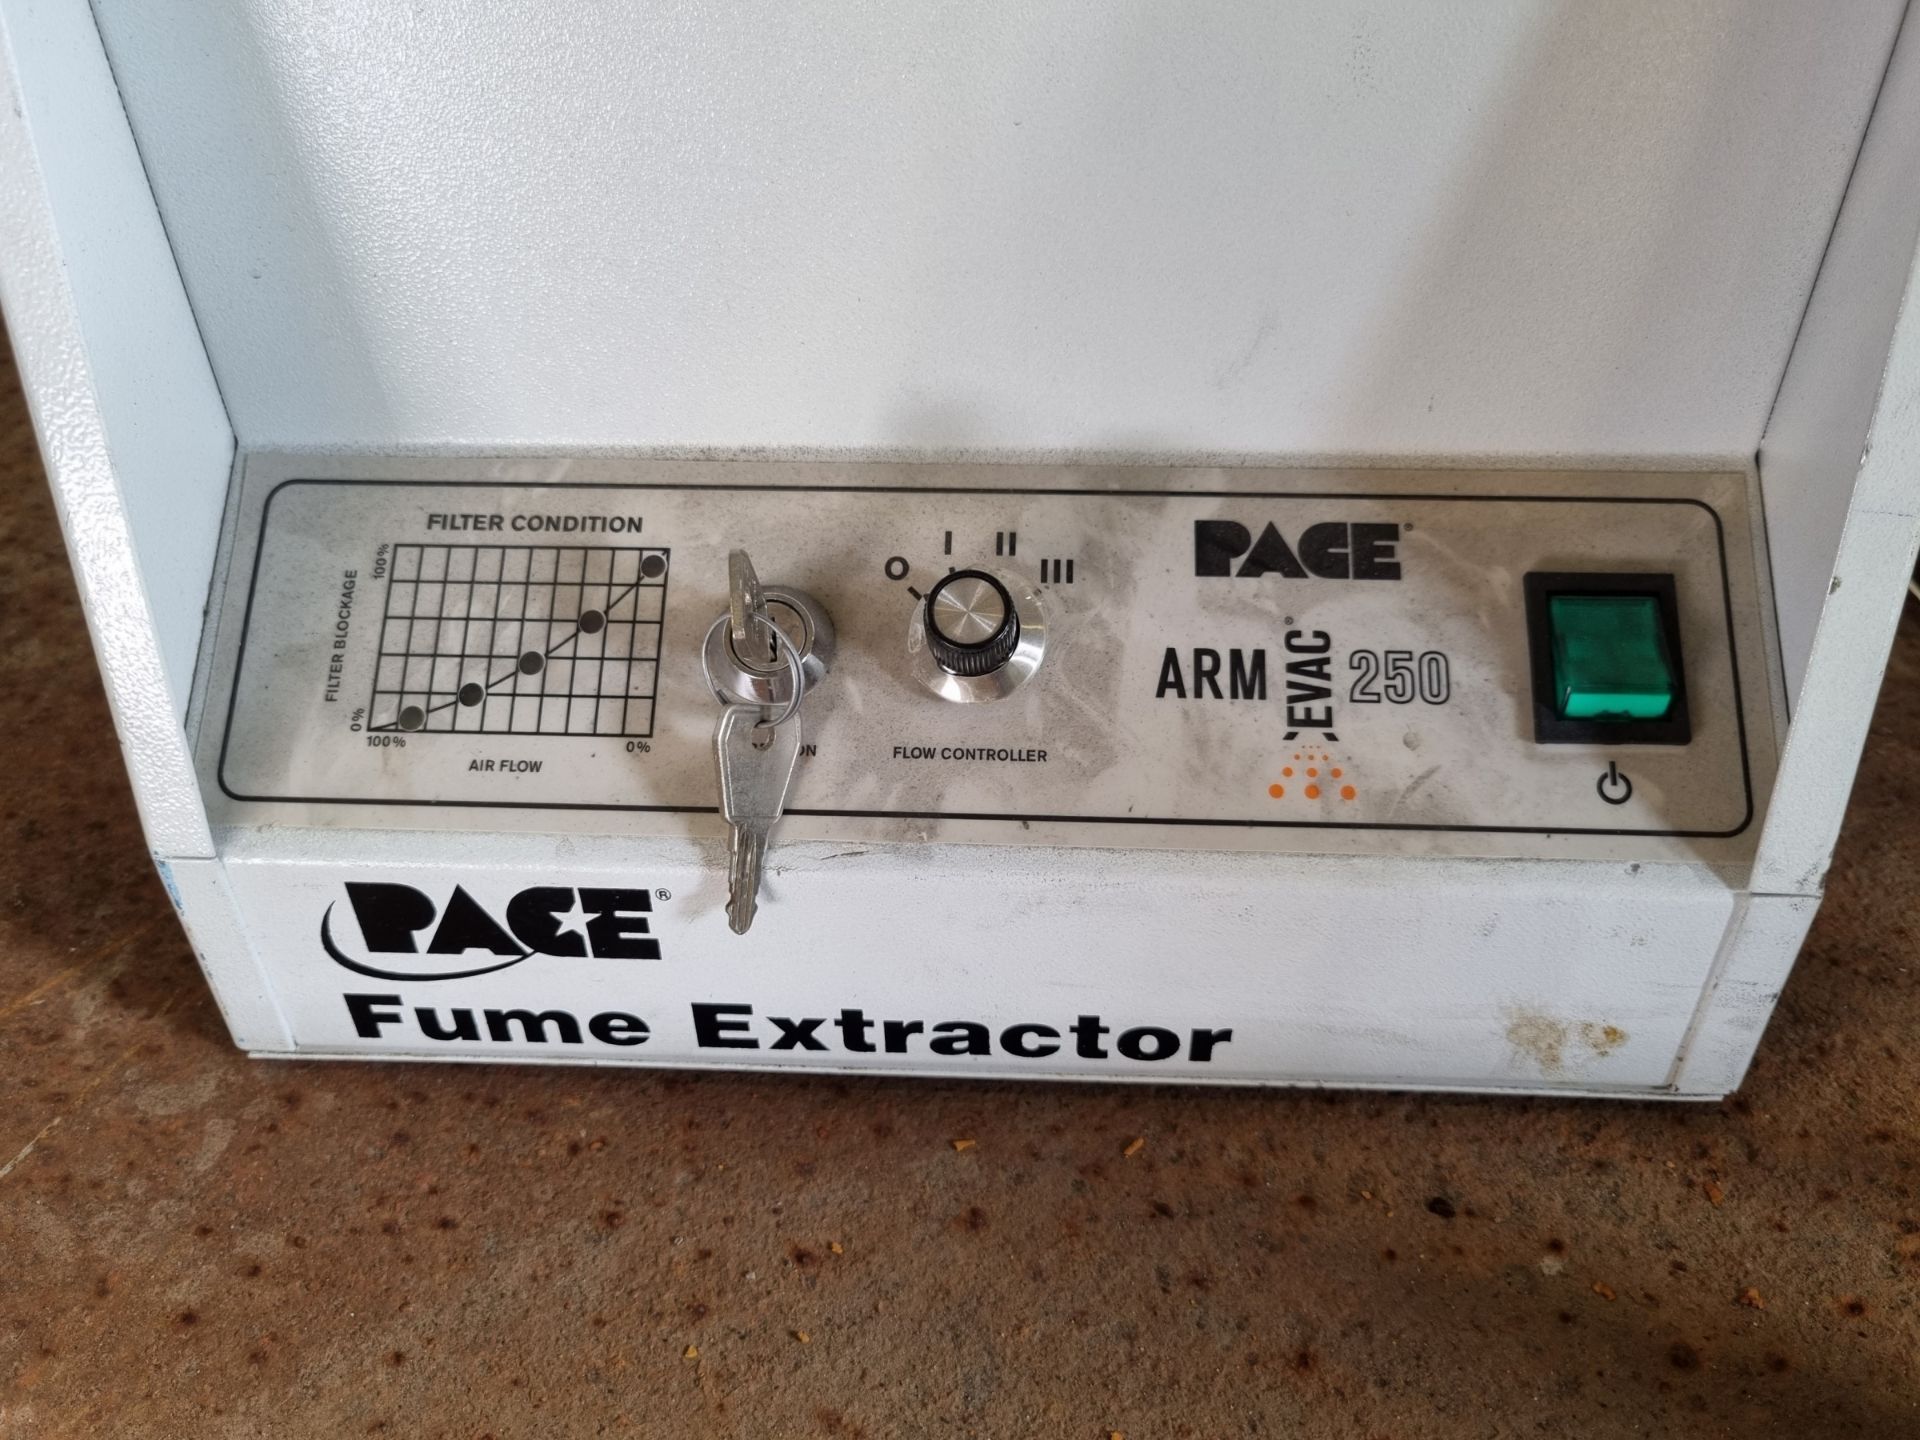 PACE ARM EVAC 250 fume extractor - Image 3 of 5